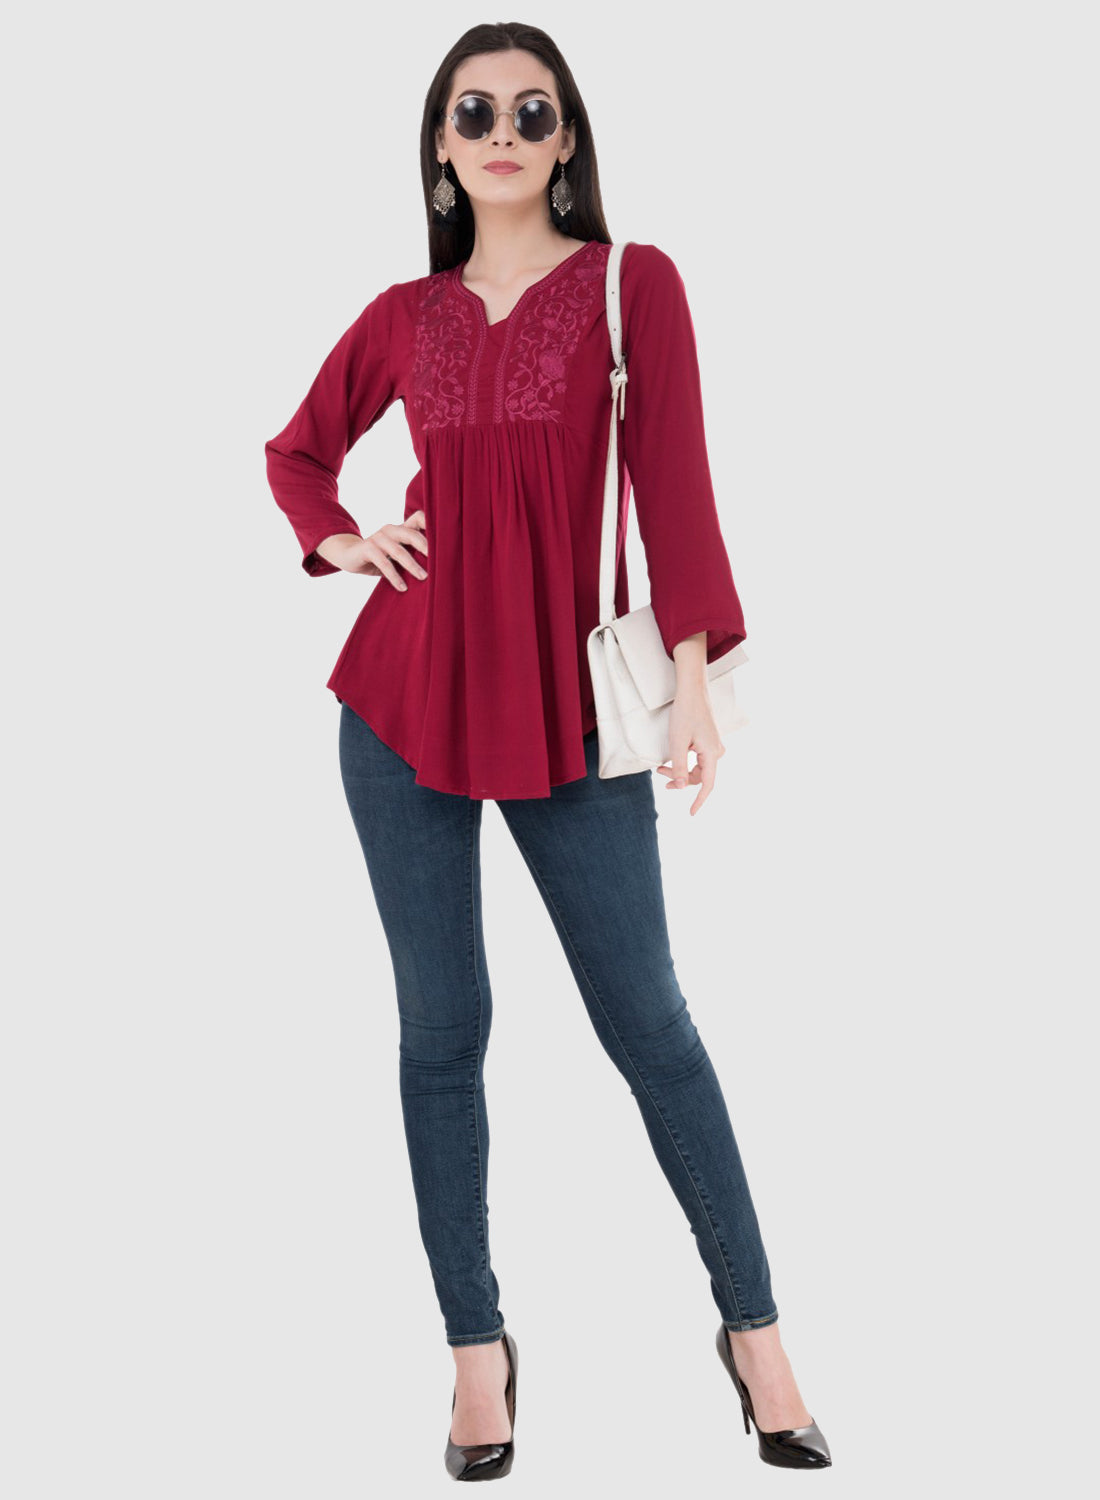 Women Top Maroon Rayon Casual Regular Fit and Flare 3/4 Sleeve